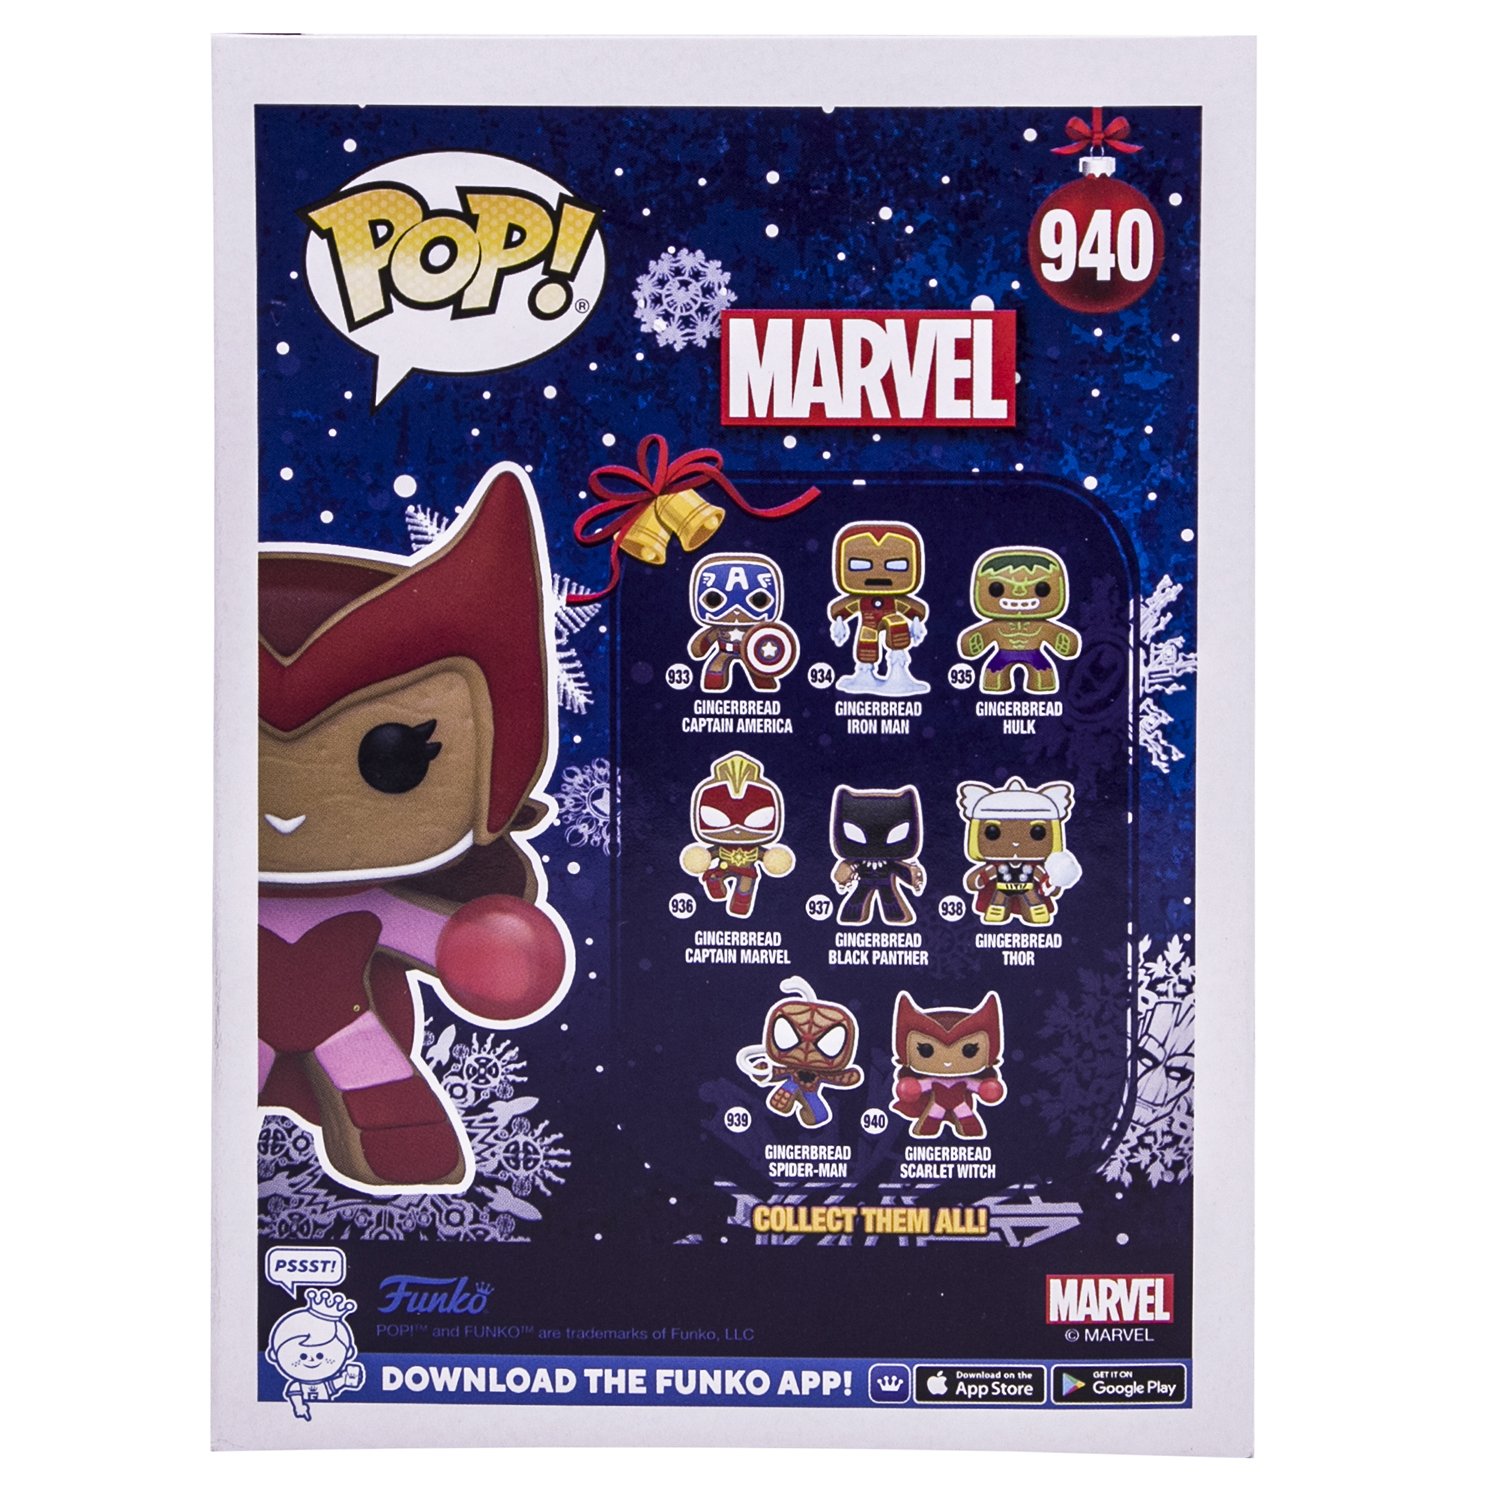 Игрушка Funko Holiday Gingerbread Scarlet Witch Fun25491637